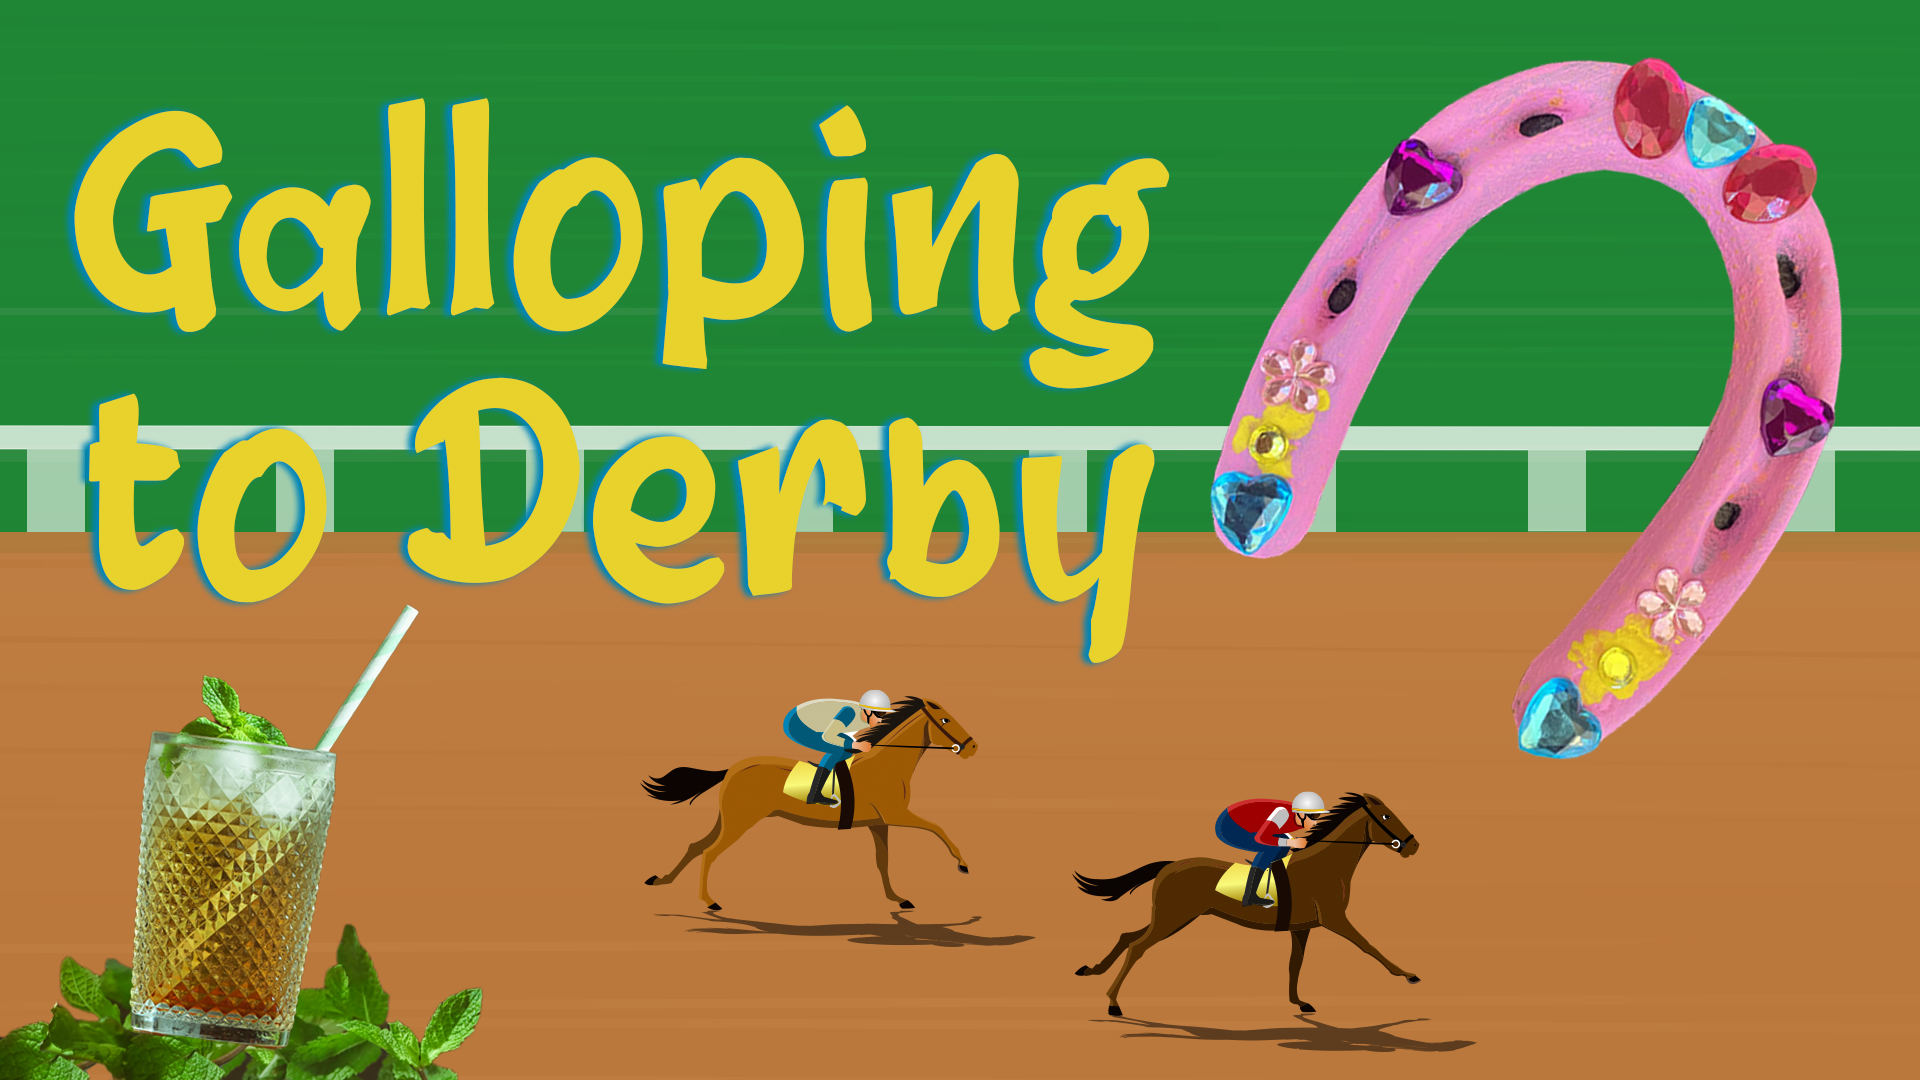 Image reads "Galloping to Derby" against a horse racing track background. Under the title are two animated horses with jockeys on their backs and a kid-friendly mint julep. To the right of the title is a bejeweled horseshoe.